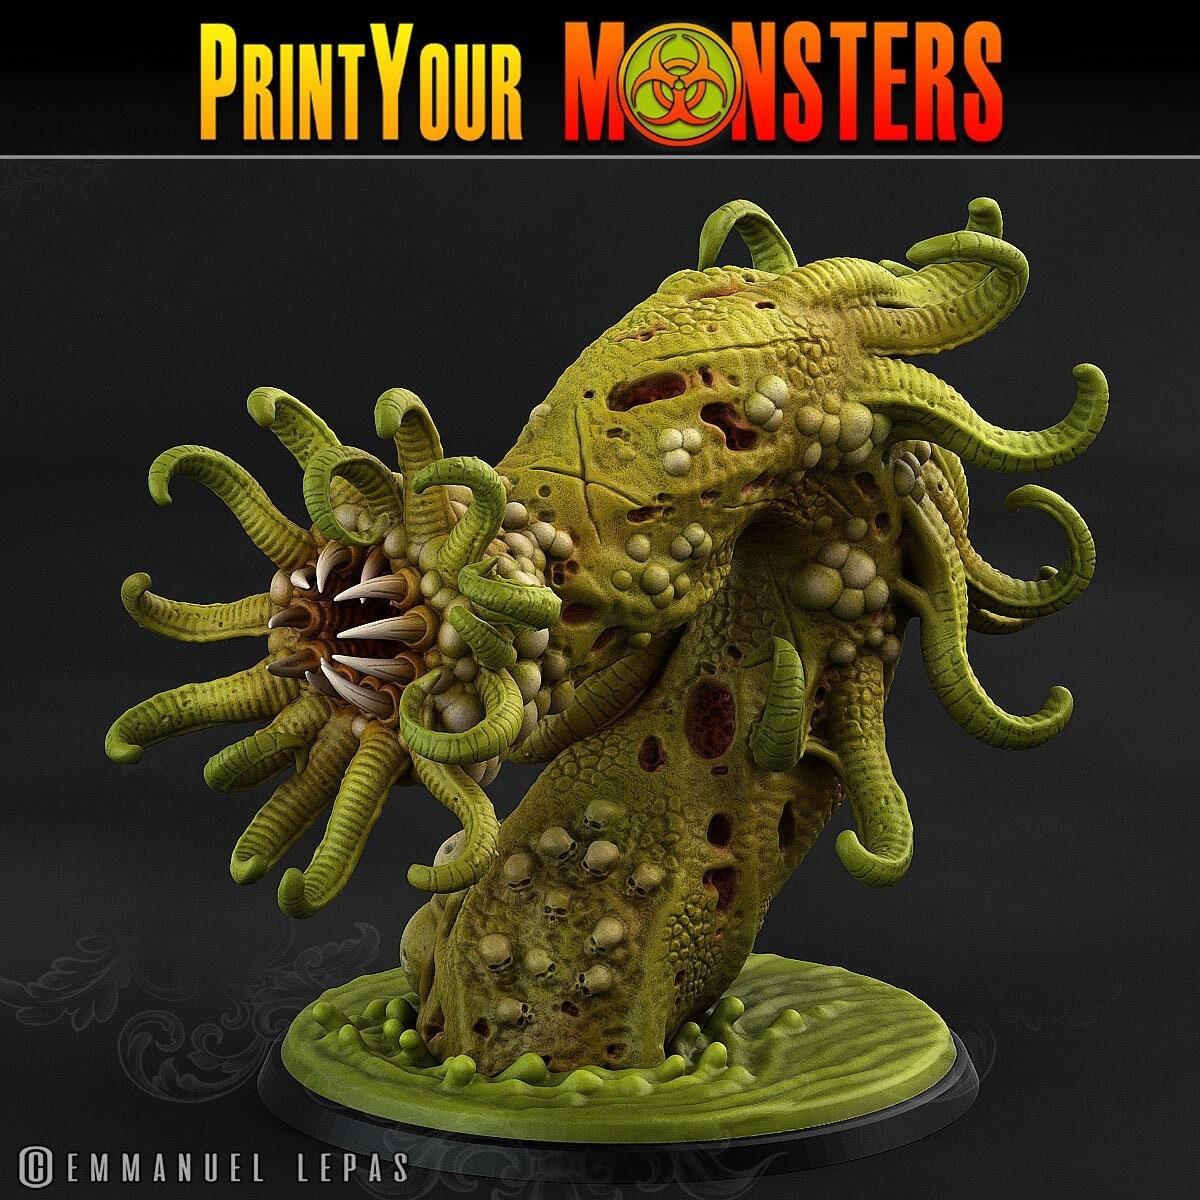 Plague Worm Miniatures Monster Miniature | Print Your Monsters | Tabletop gaming | DnD Miniature | Dungeons and Dragons, dnd 5e worm miniature - Plague Miniatures shop for DnD Miniatures